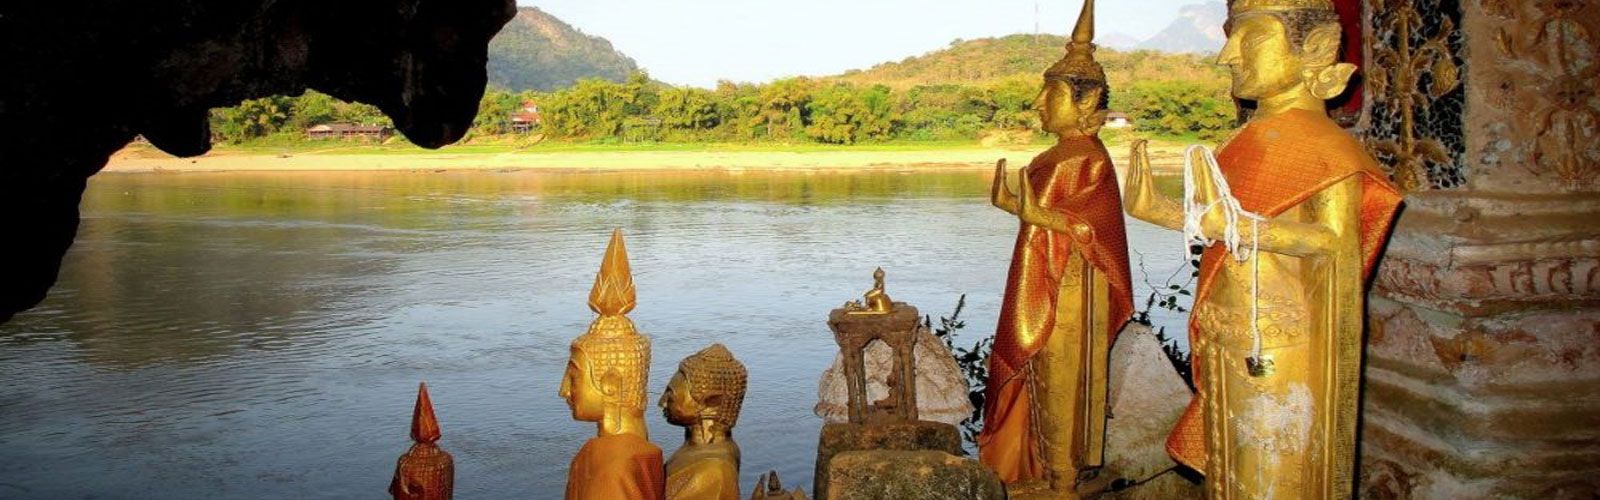 Top Rated Attractions In Laos | best place | Asianventure Tours